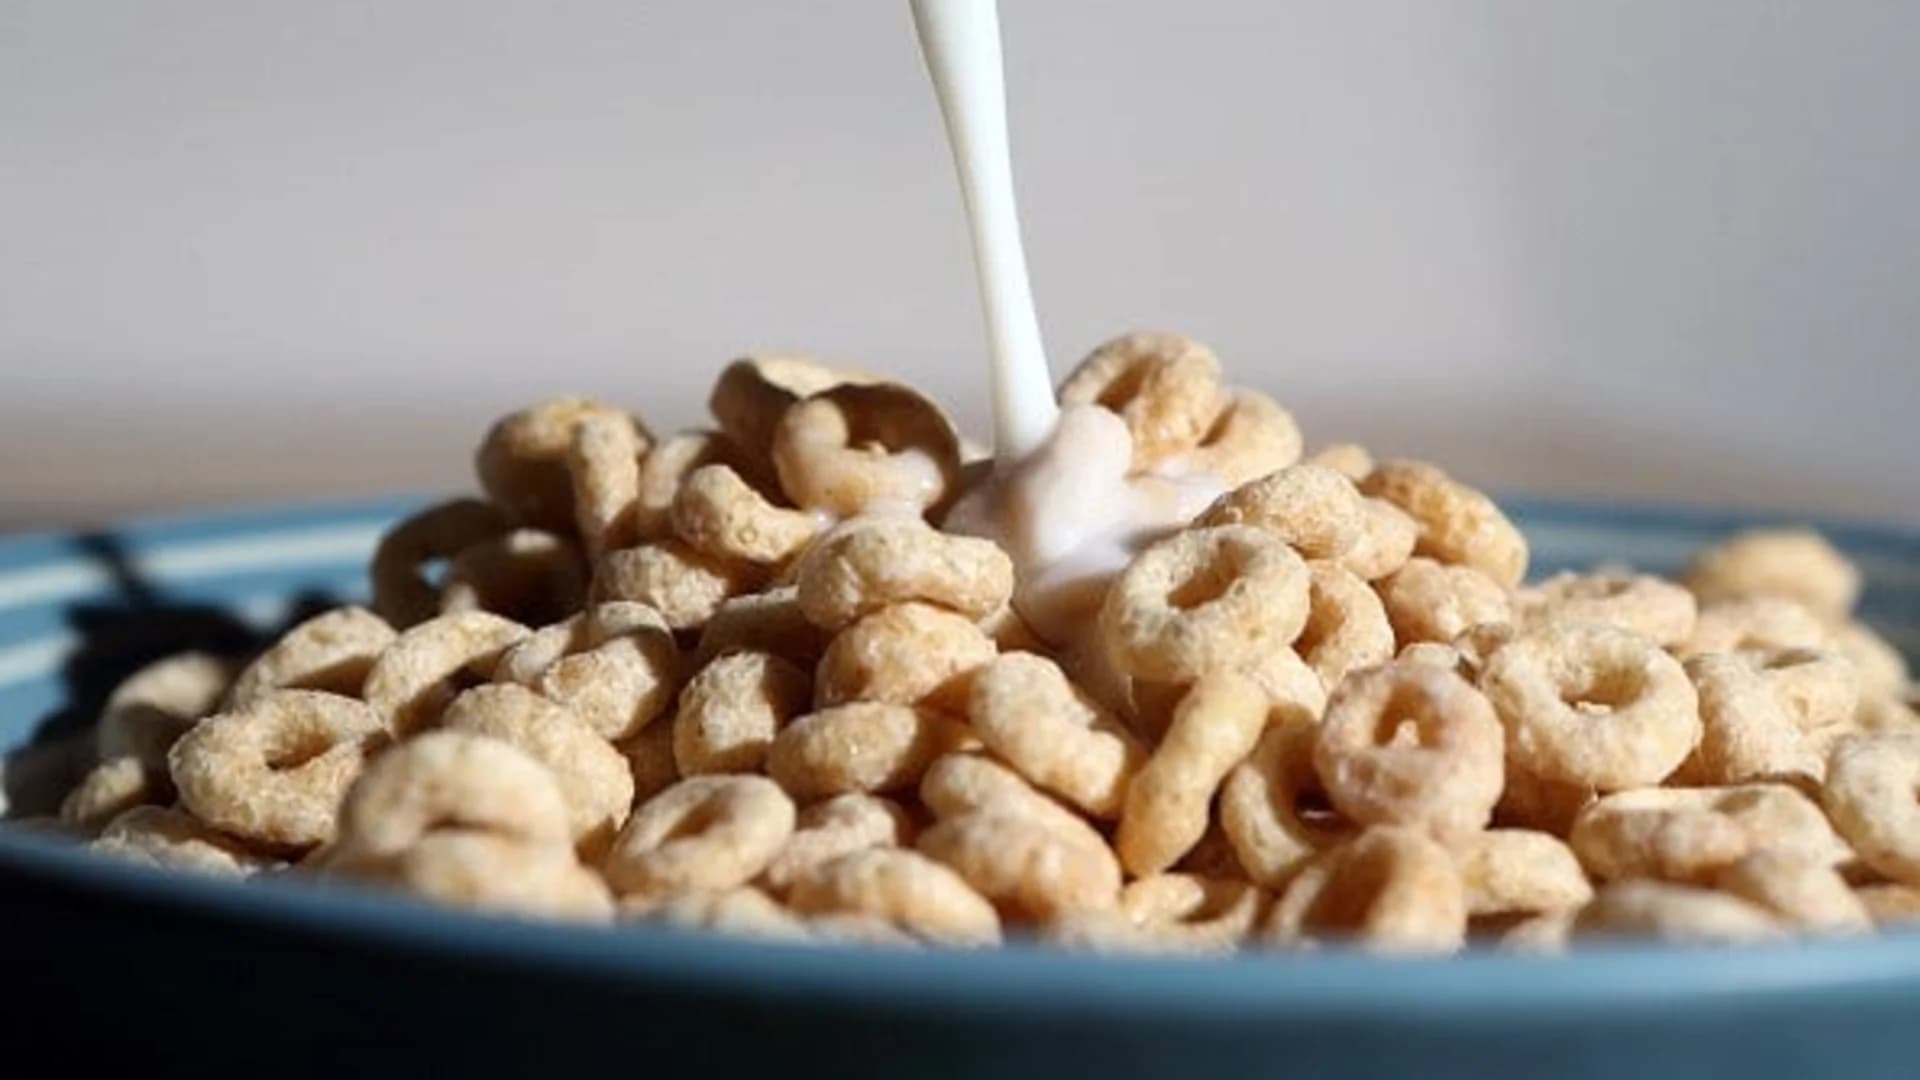 Study: Chemical linked to cancer found in certain breakfast cereals